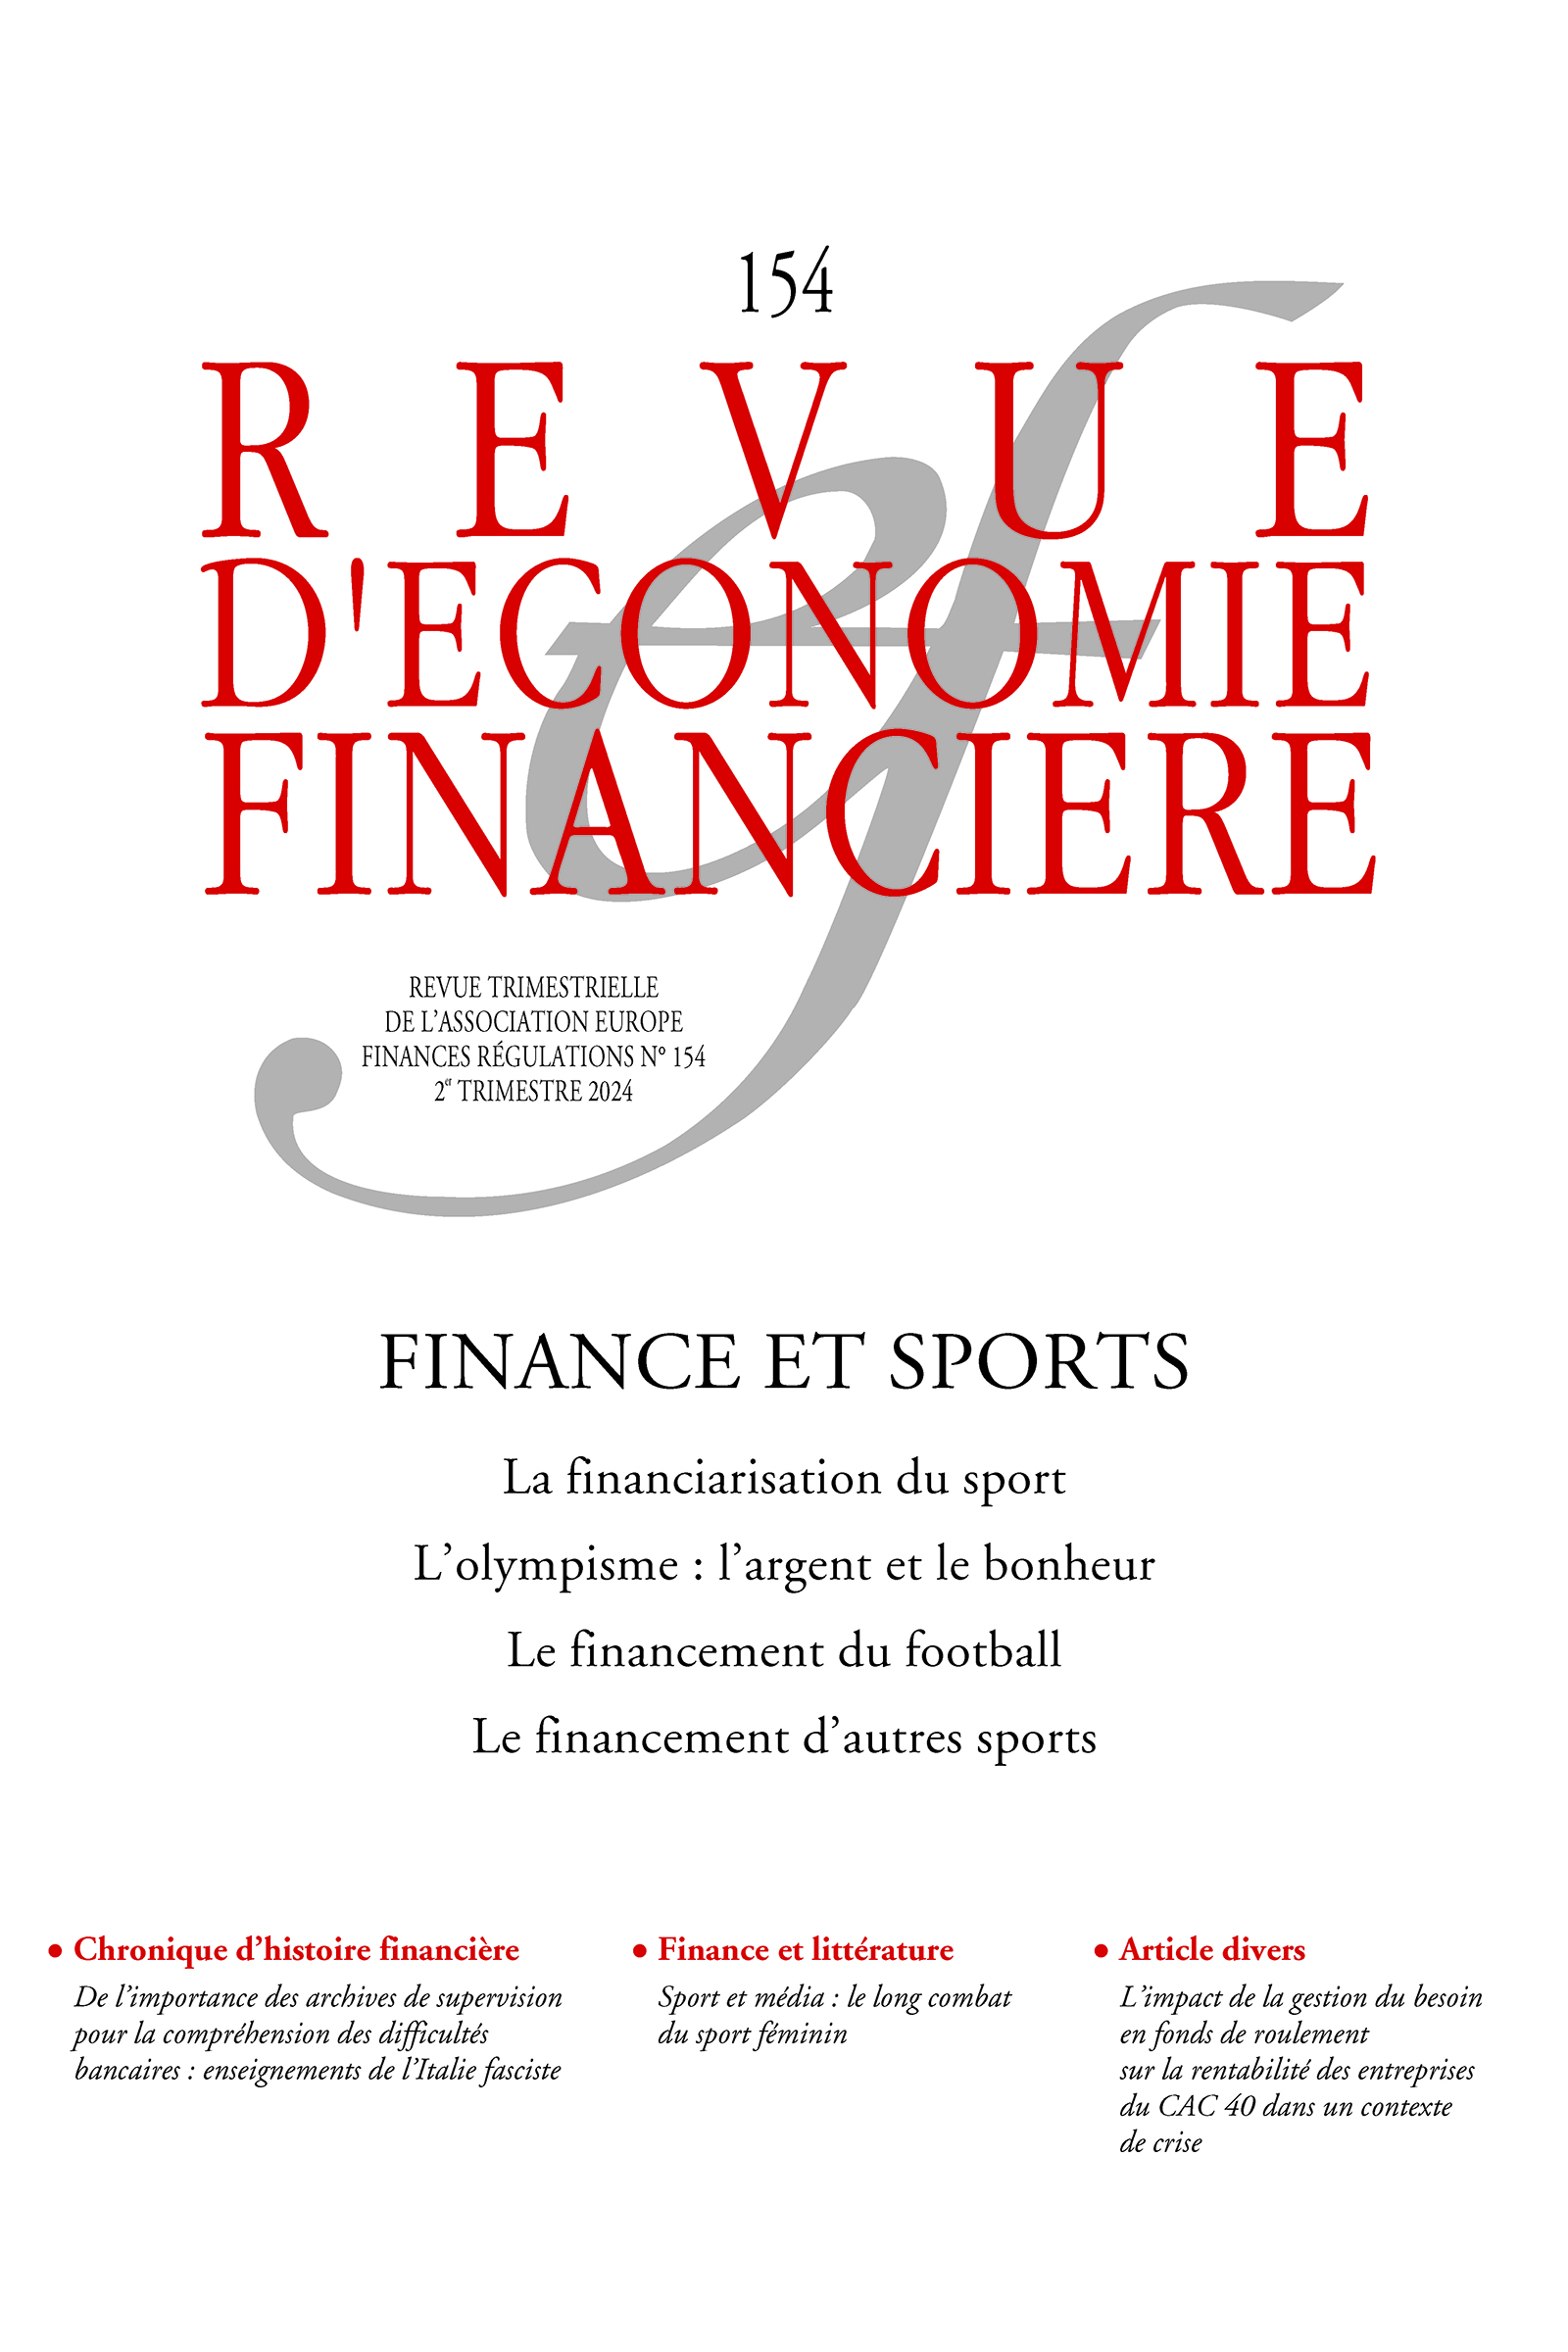 Finance and sports